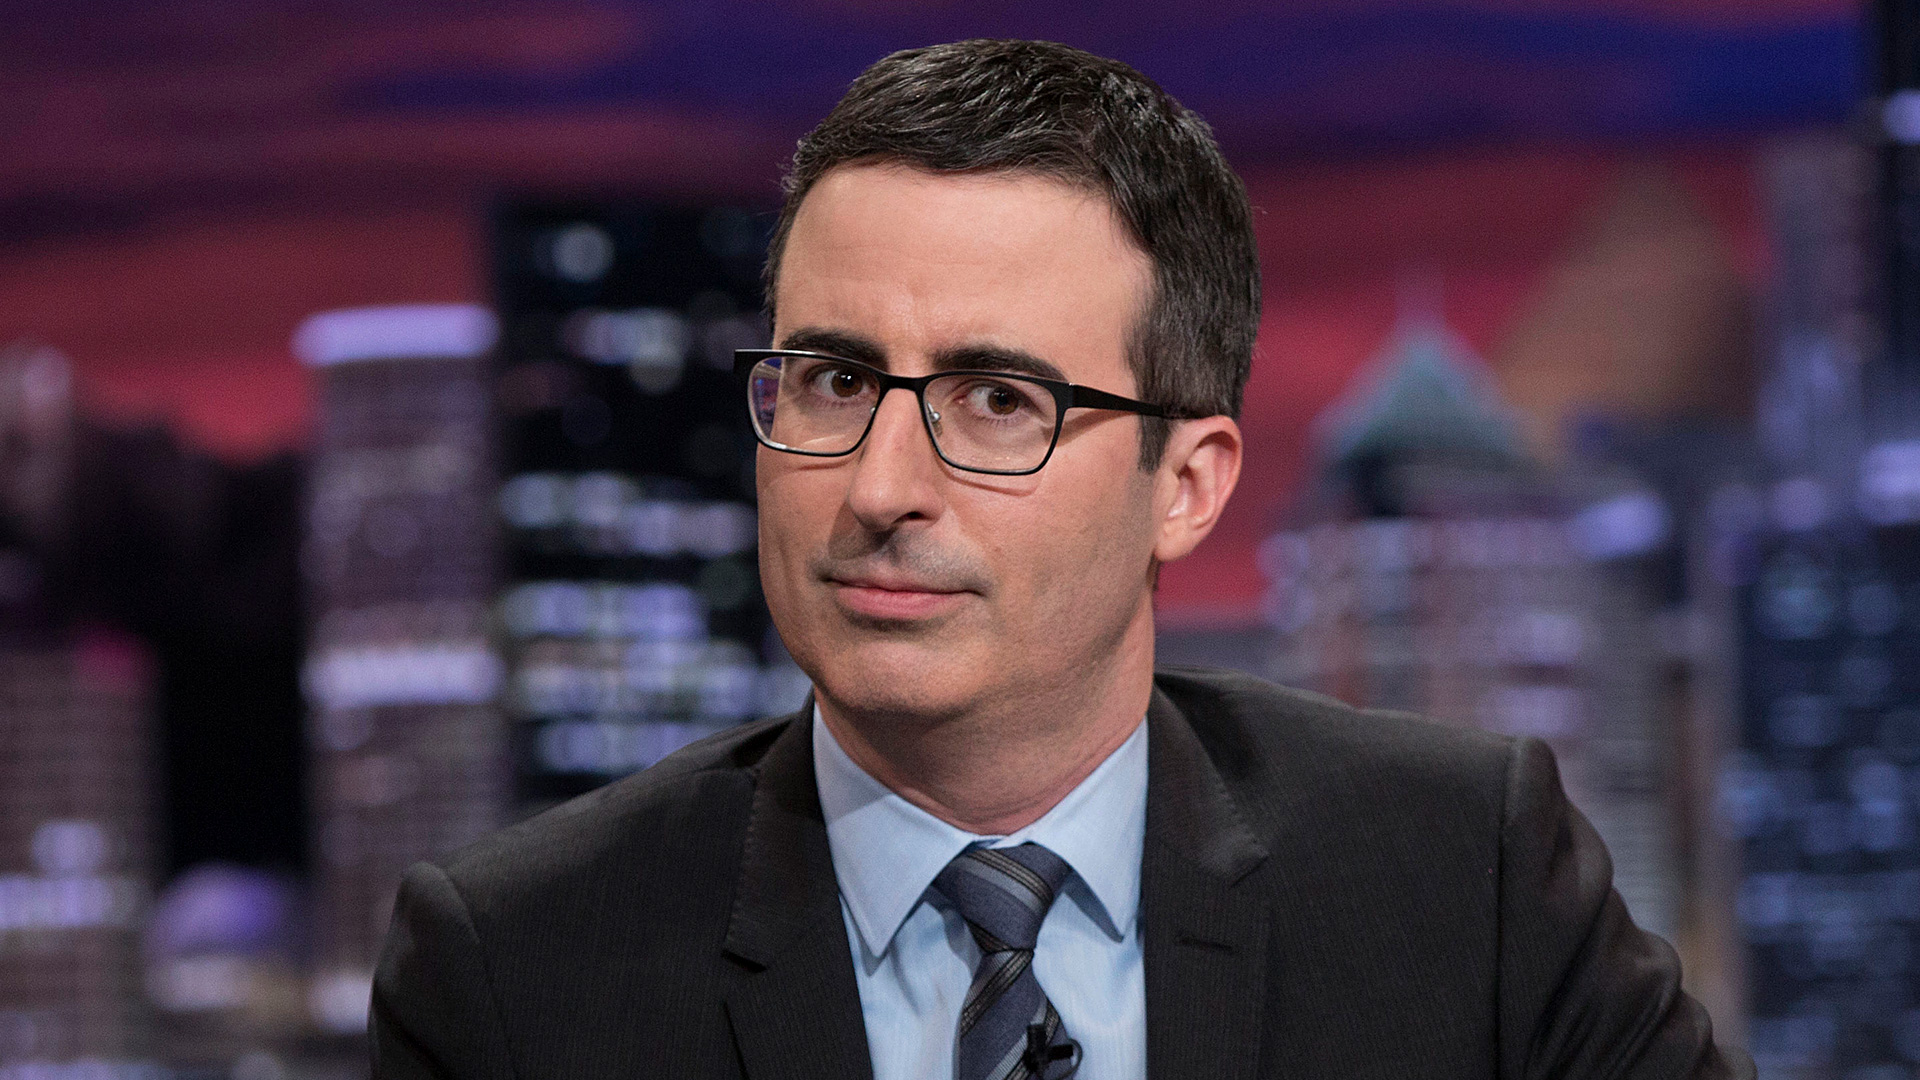 Watch: John Oliver Takes On Donald Trump’s War On Truth